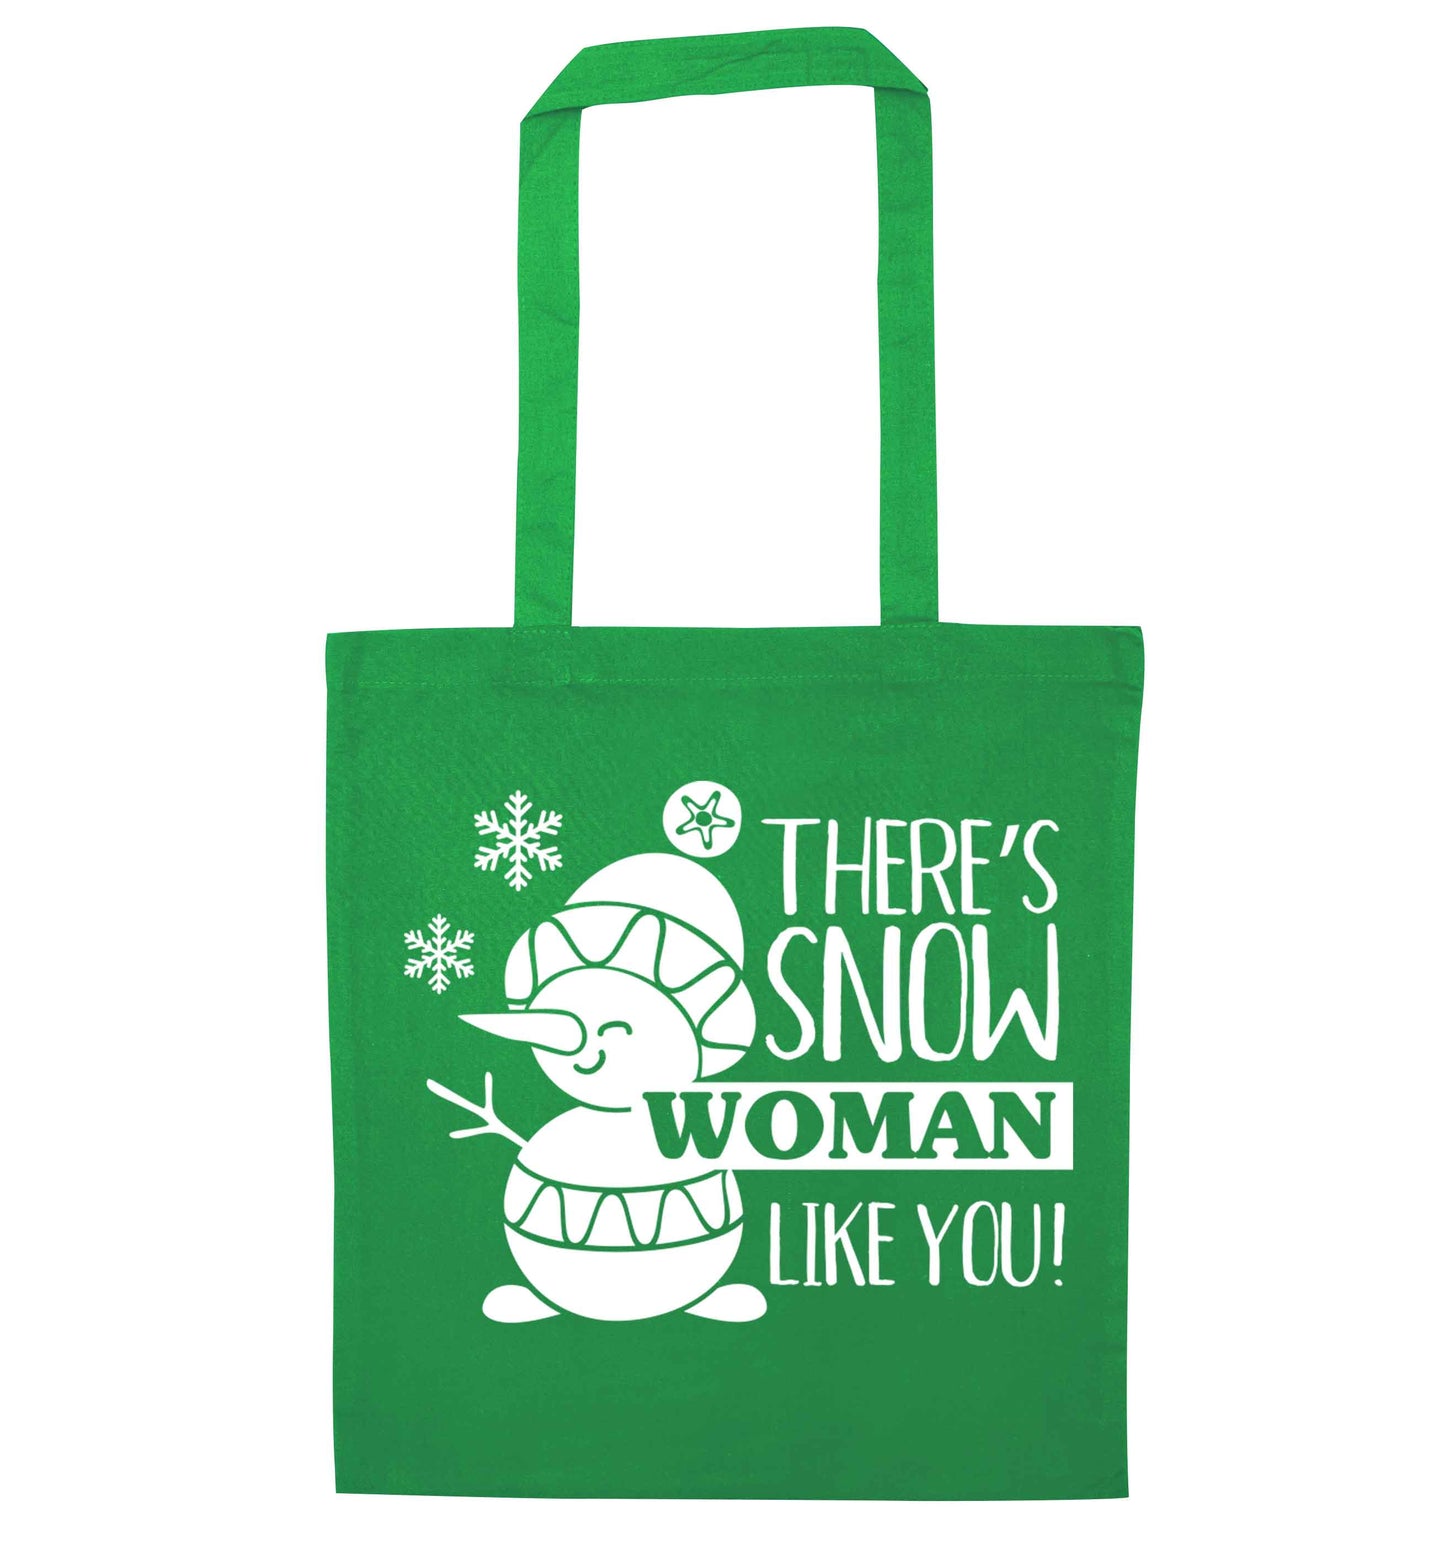 There's snow woman like you green tote bag